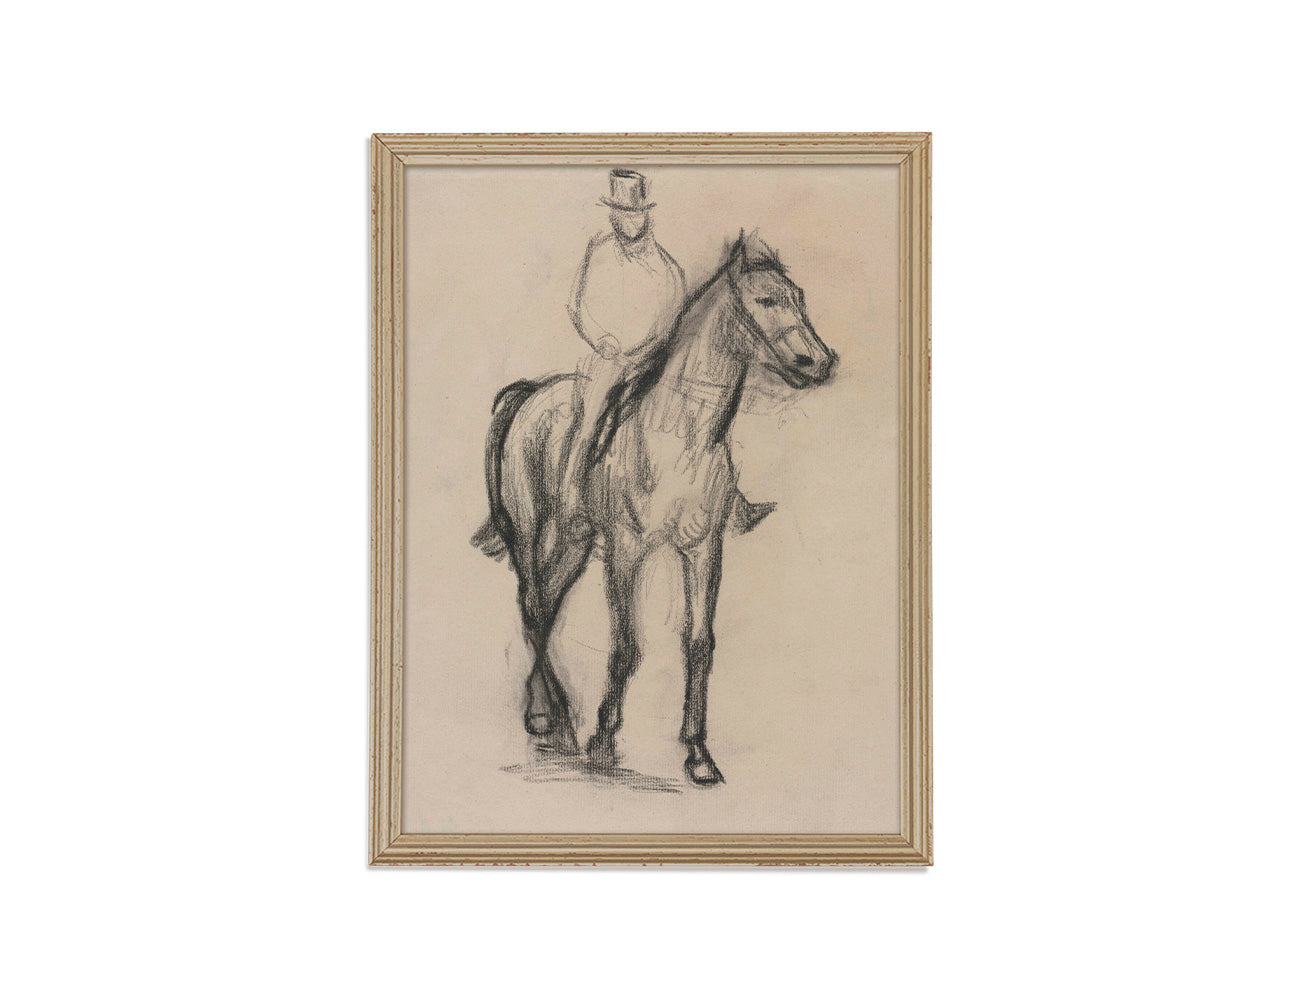 Horse and Rider Sketch Print